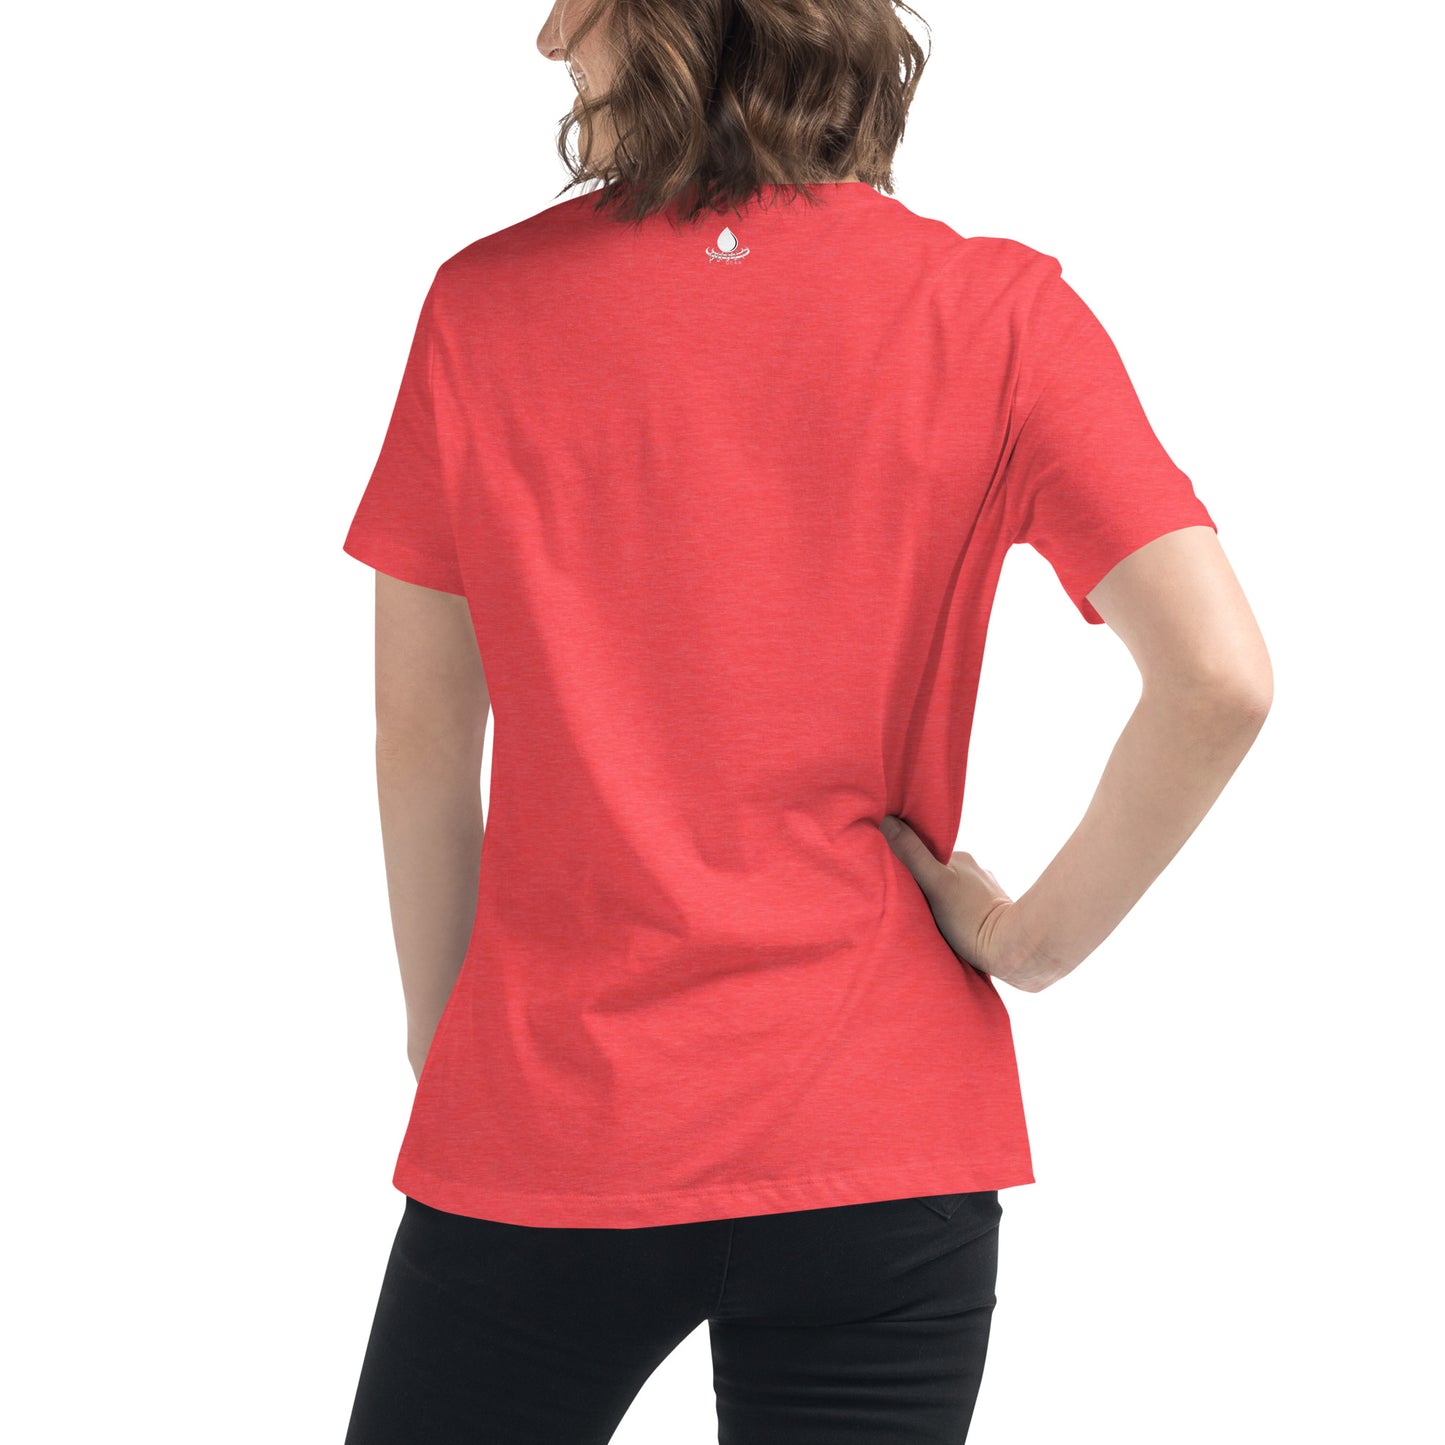 Degraders: The Baron - Women's Relaxed T-Shirt